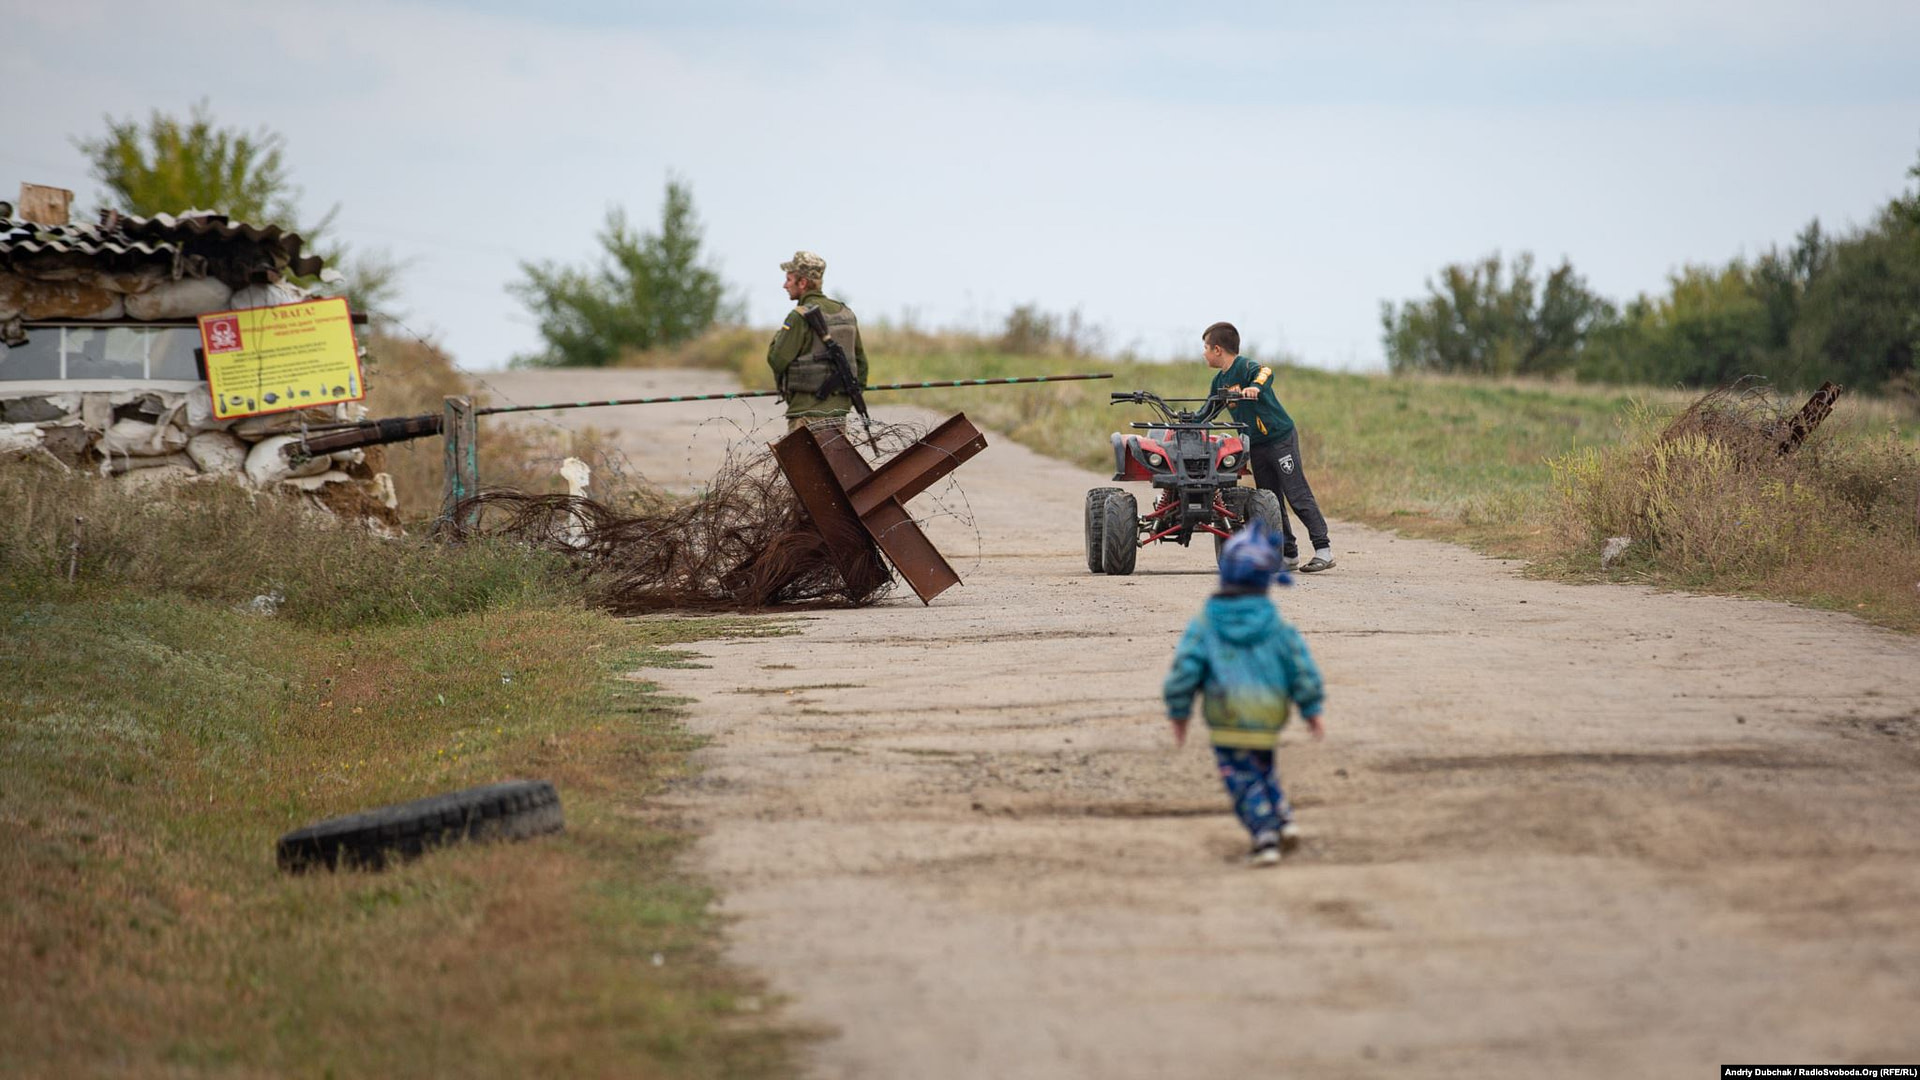 Ten-year-old Davyd rides a mini-quad bike while Stepan tries to catch up. Children are not permitted to go beyond the Luhanske checkpoint. (photo: Andriy Dubchak)